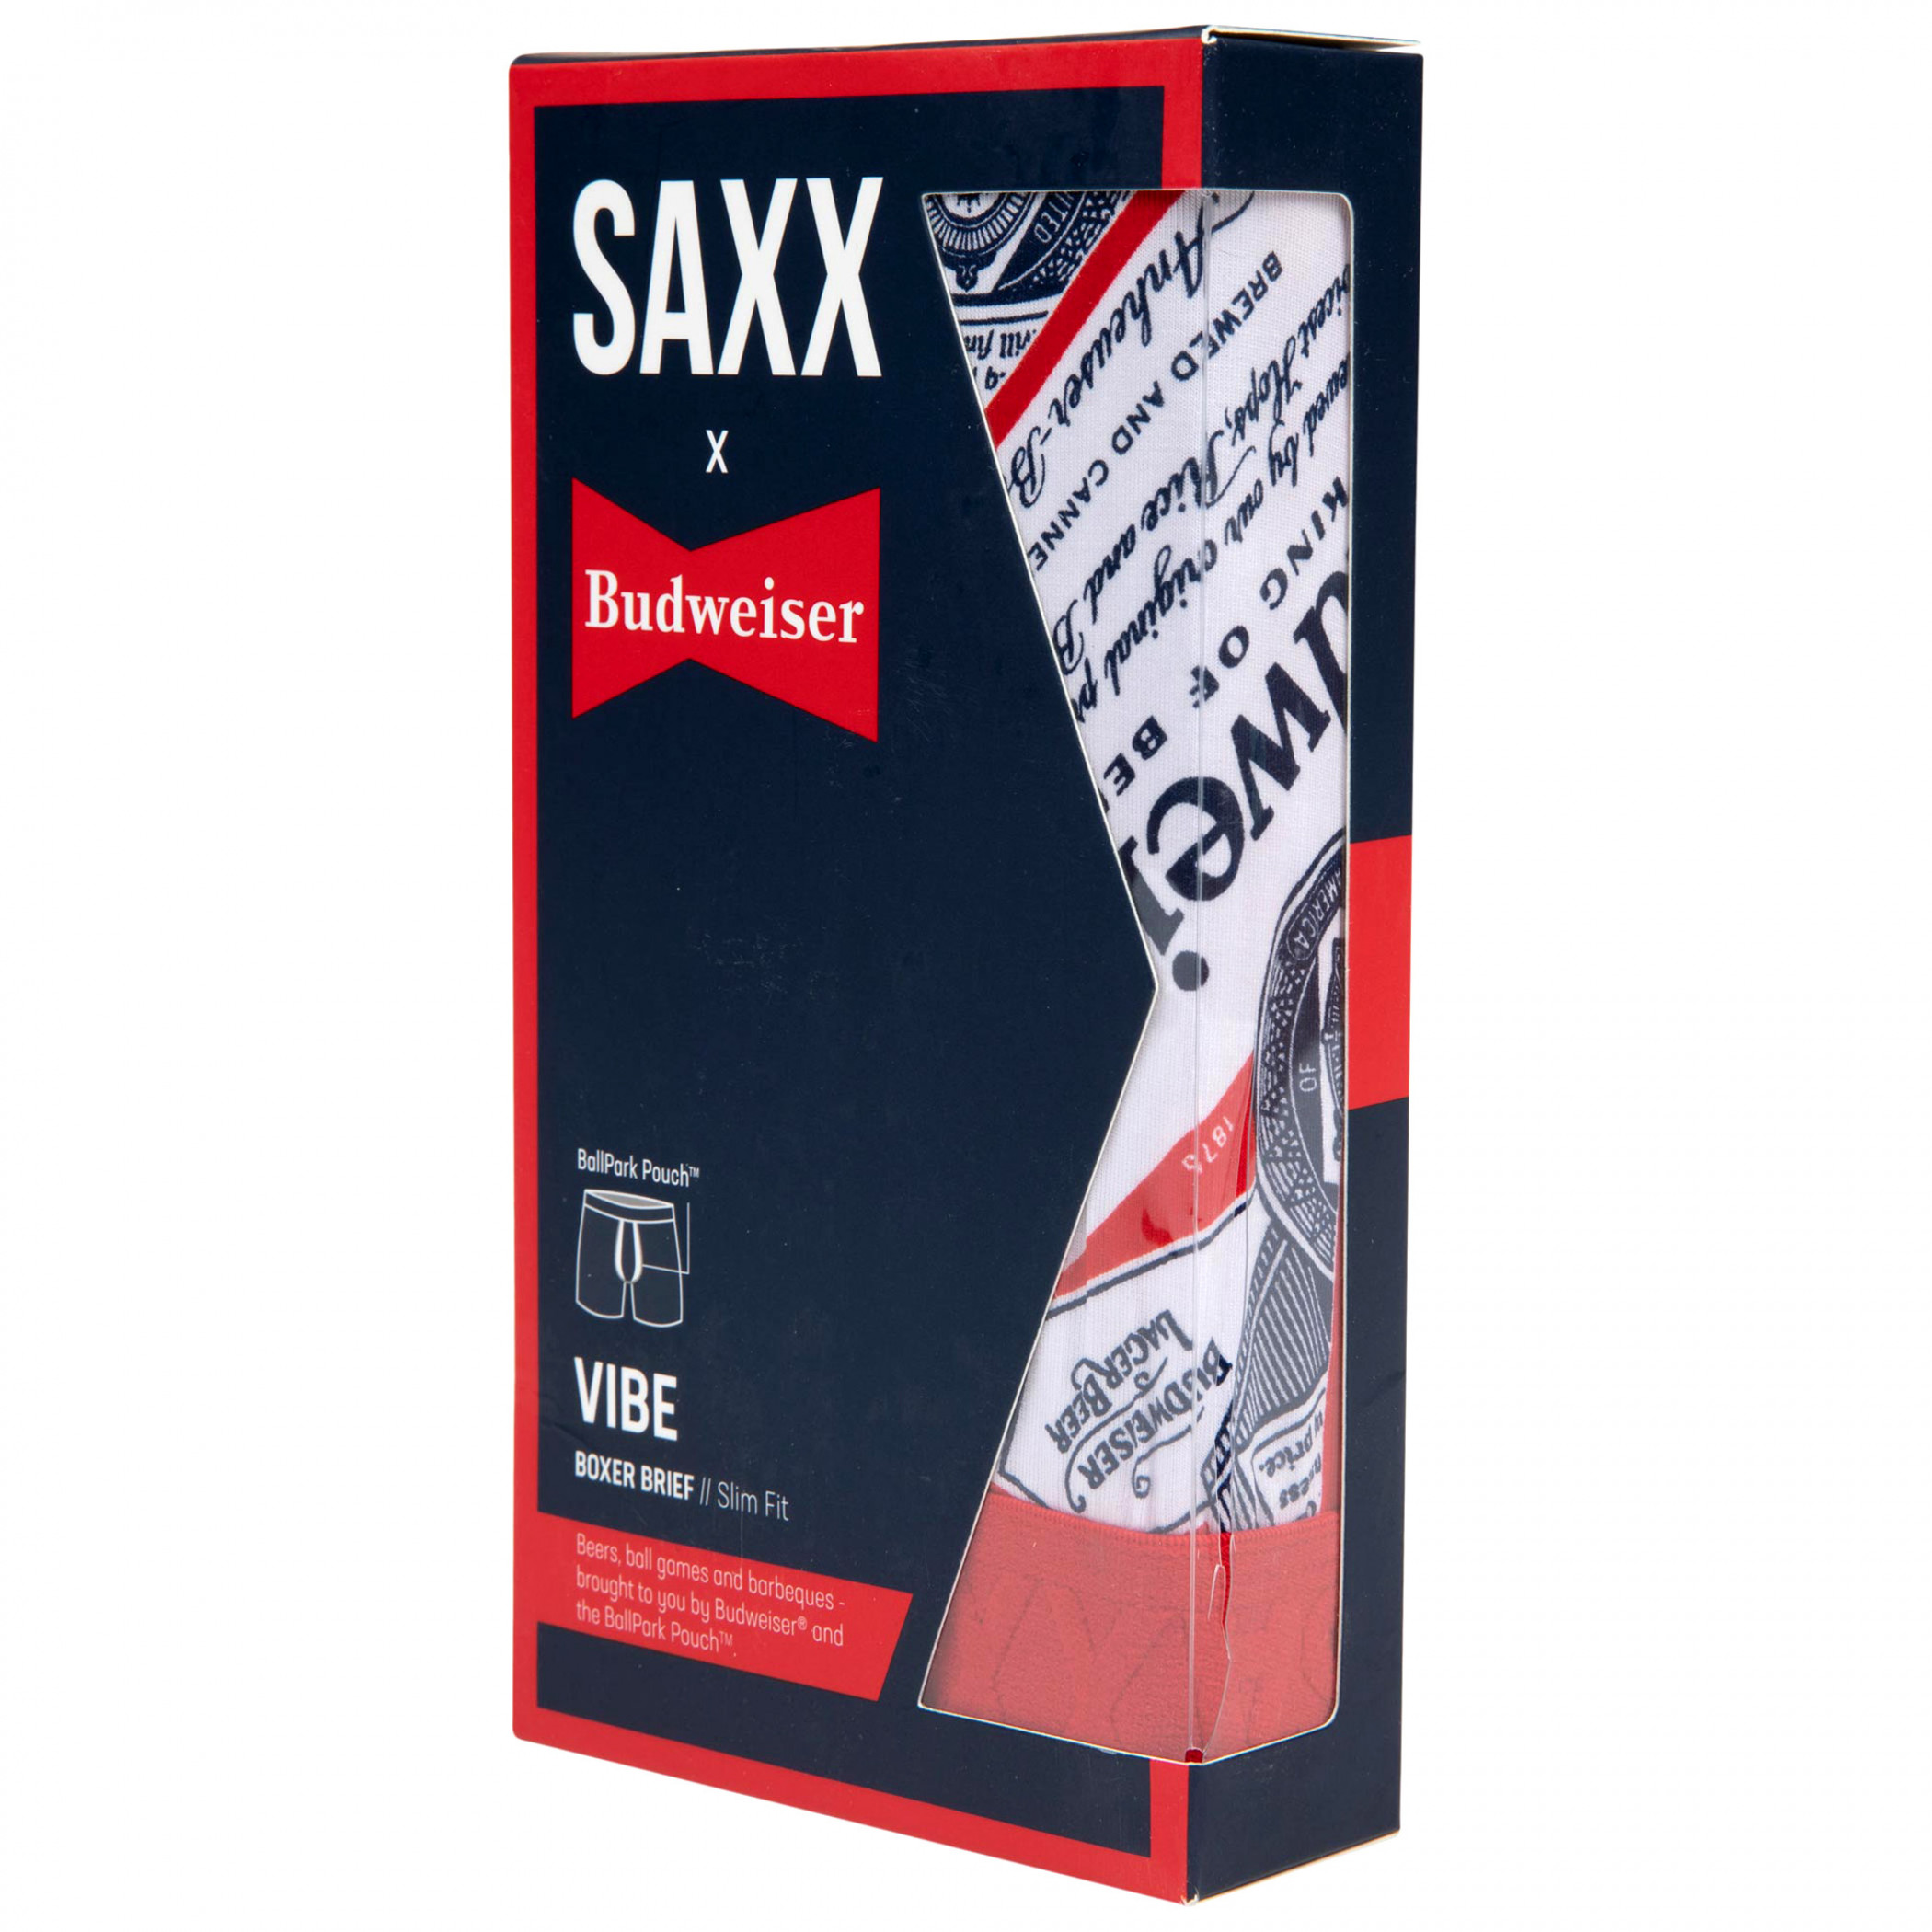 Budweiser Beer Repeating Labels SAXX Men's Boxer Briefs